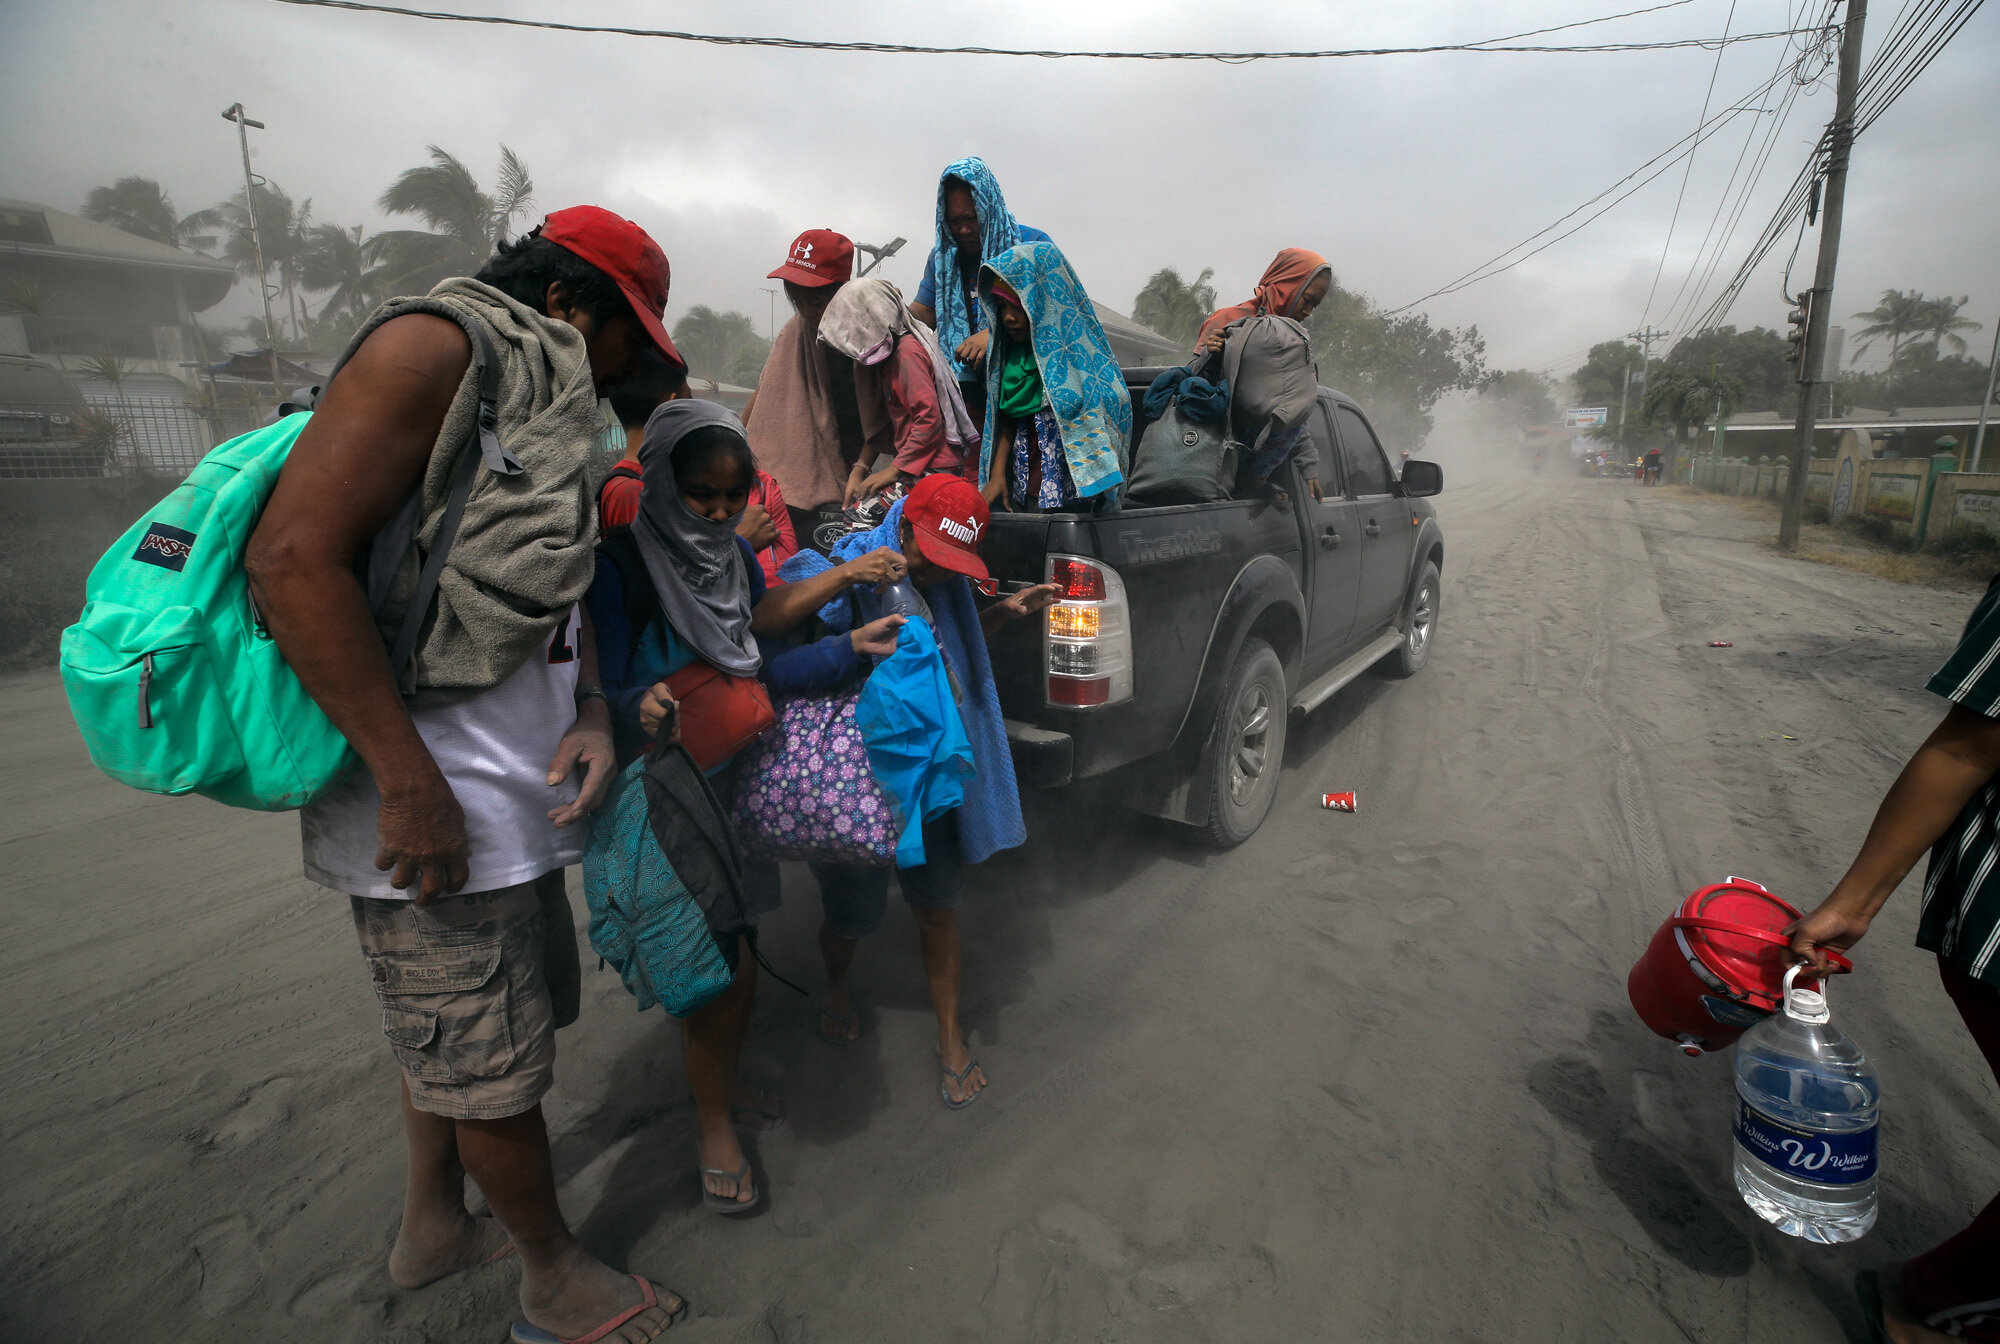  A family evacuates to safer ground as the Taal Volcano spews ash in Lemery, Batangas, southern Philippines on Jan. 13, 2020. (AP Photo/Aaron Favila) 